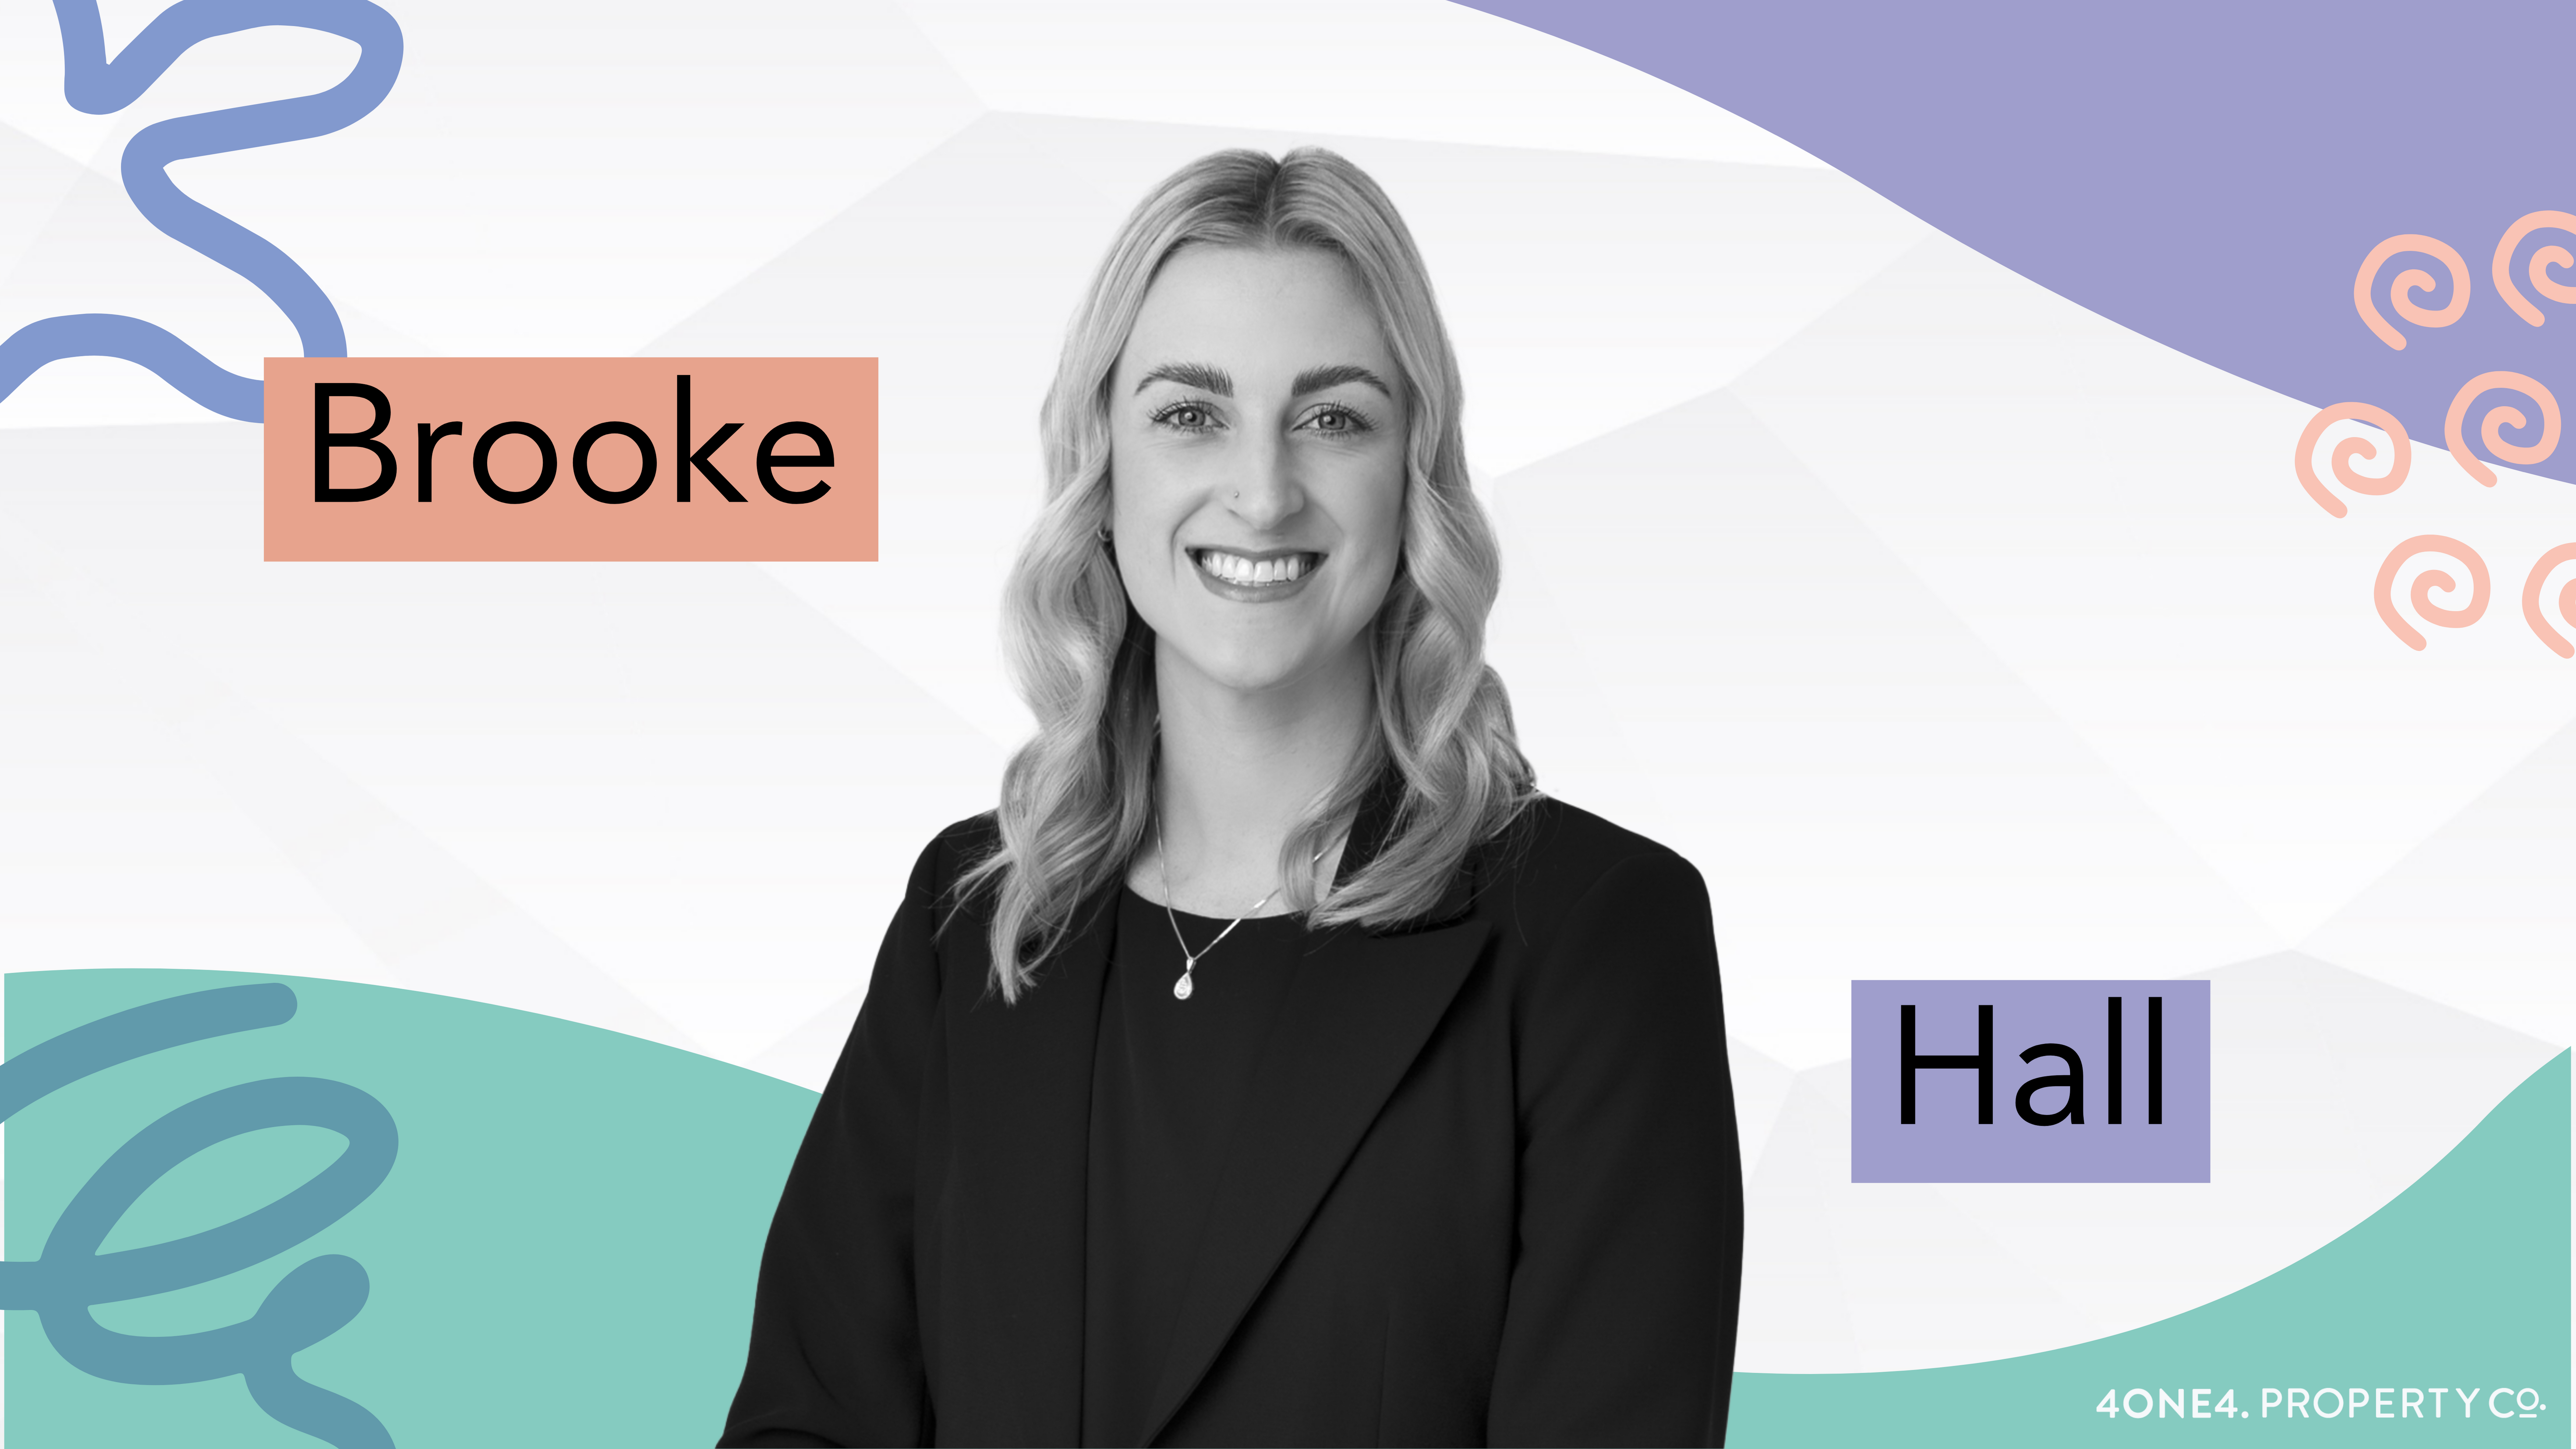 Welcome to 4one4, Brooke Hall!